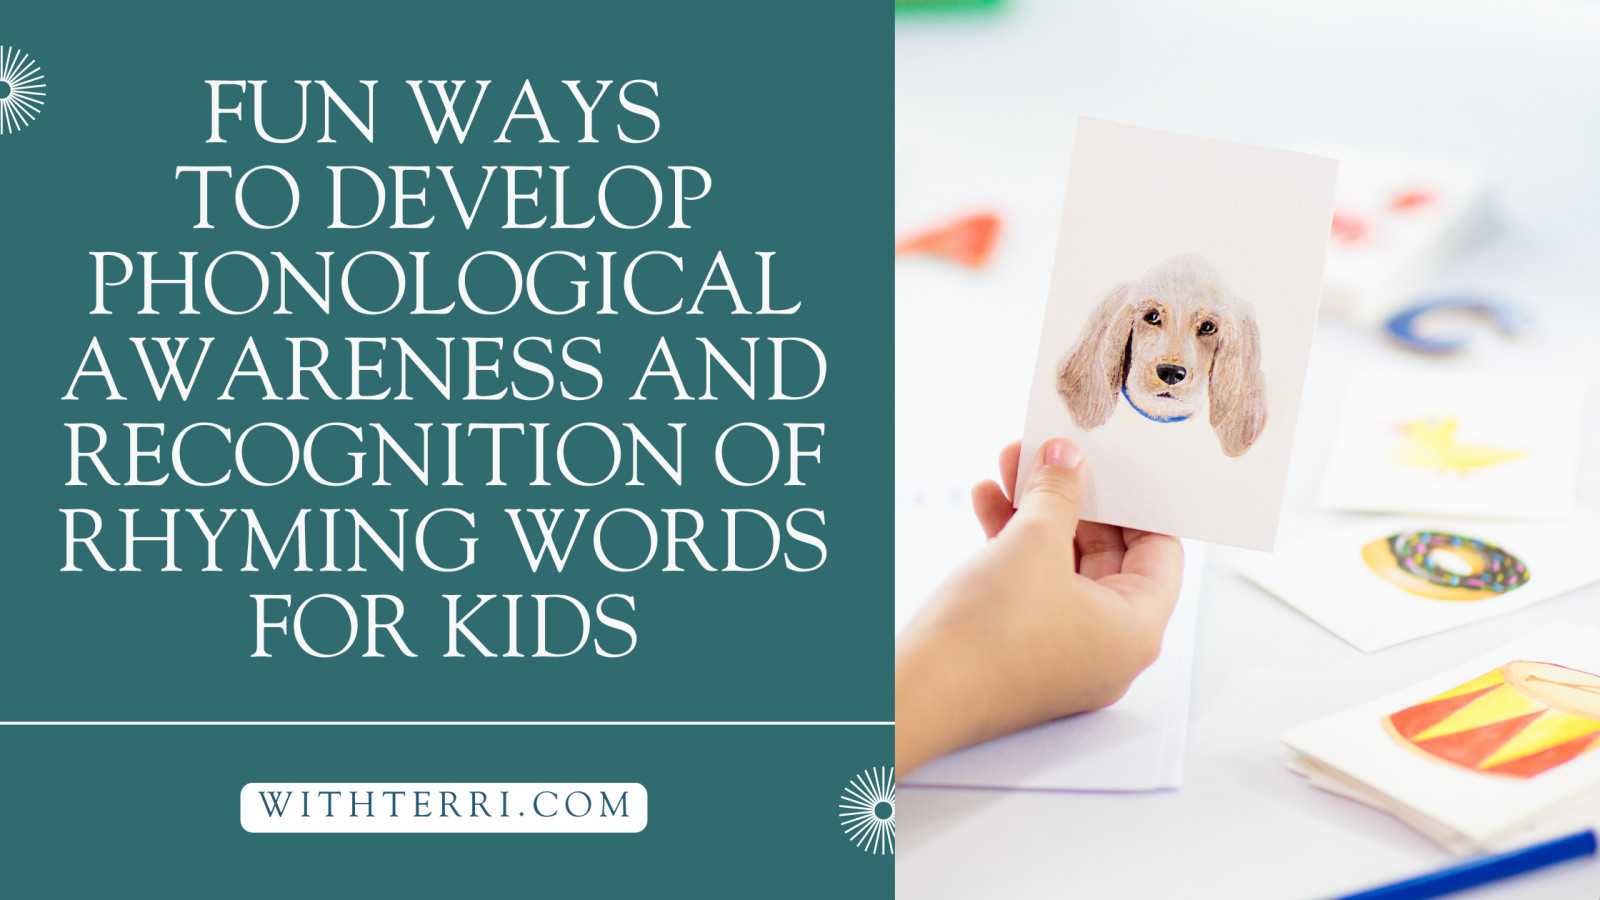 Recognition of Rhyming Words for Kids